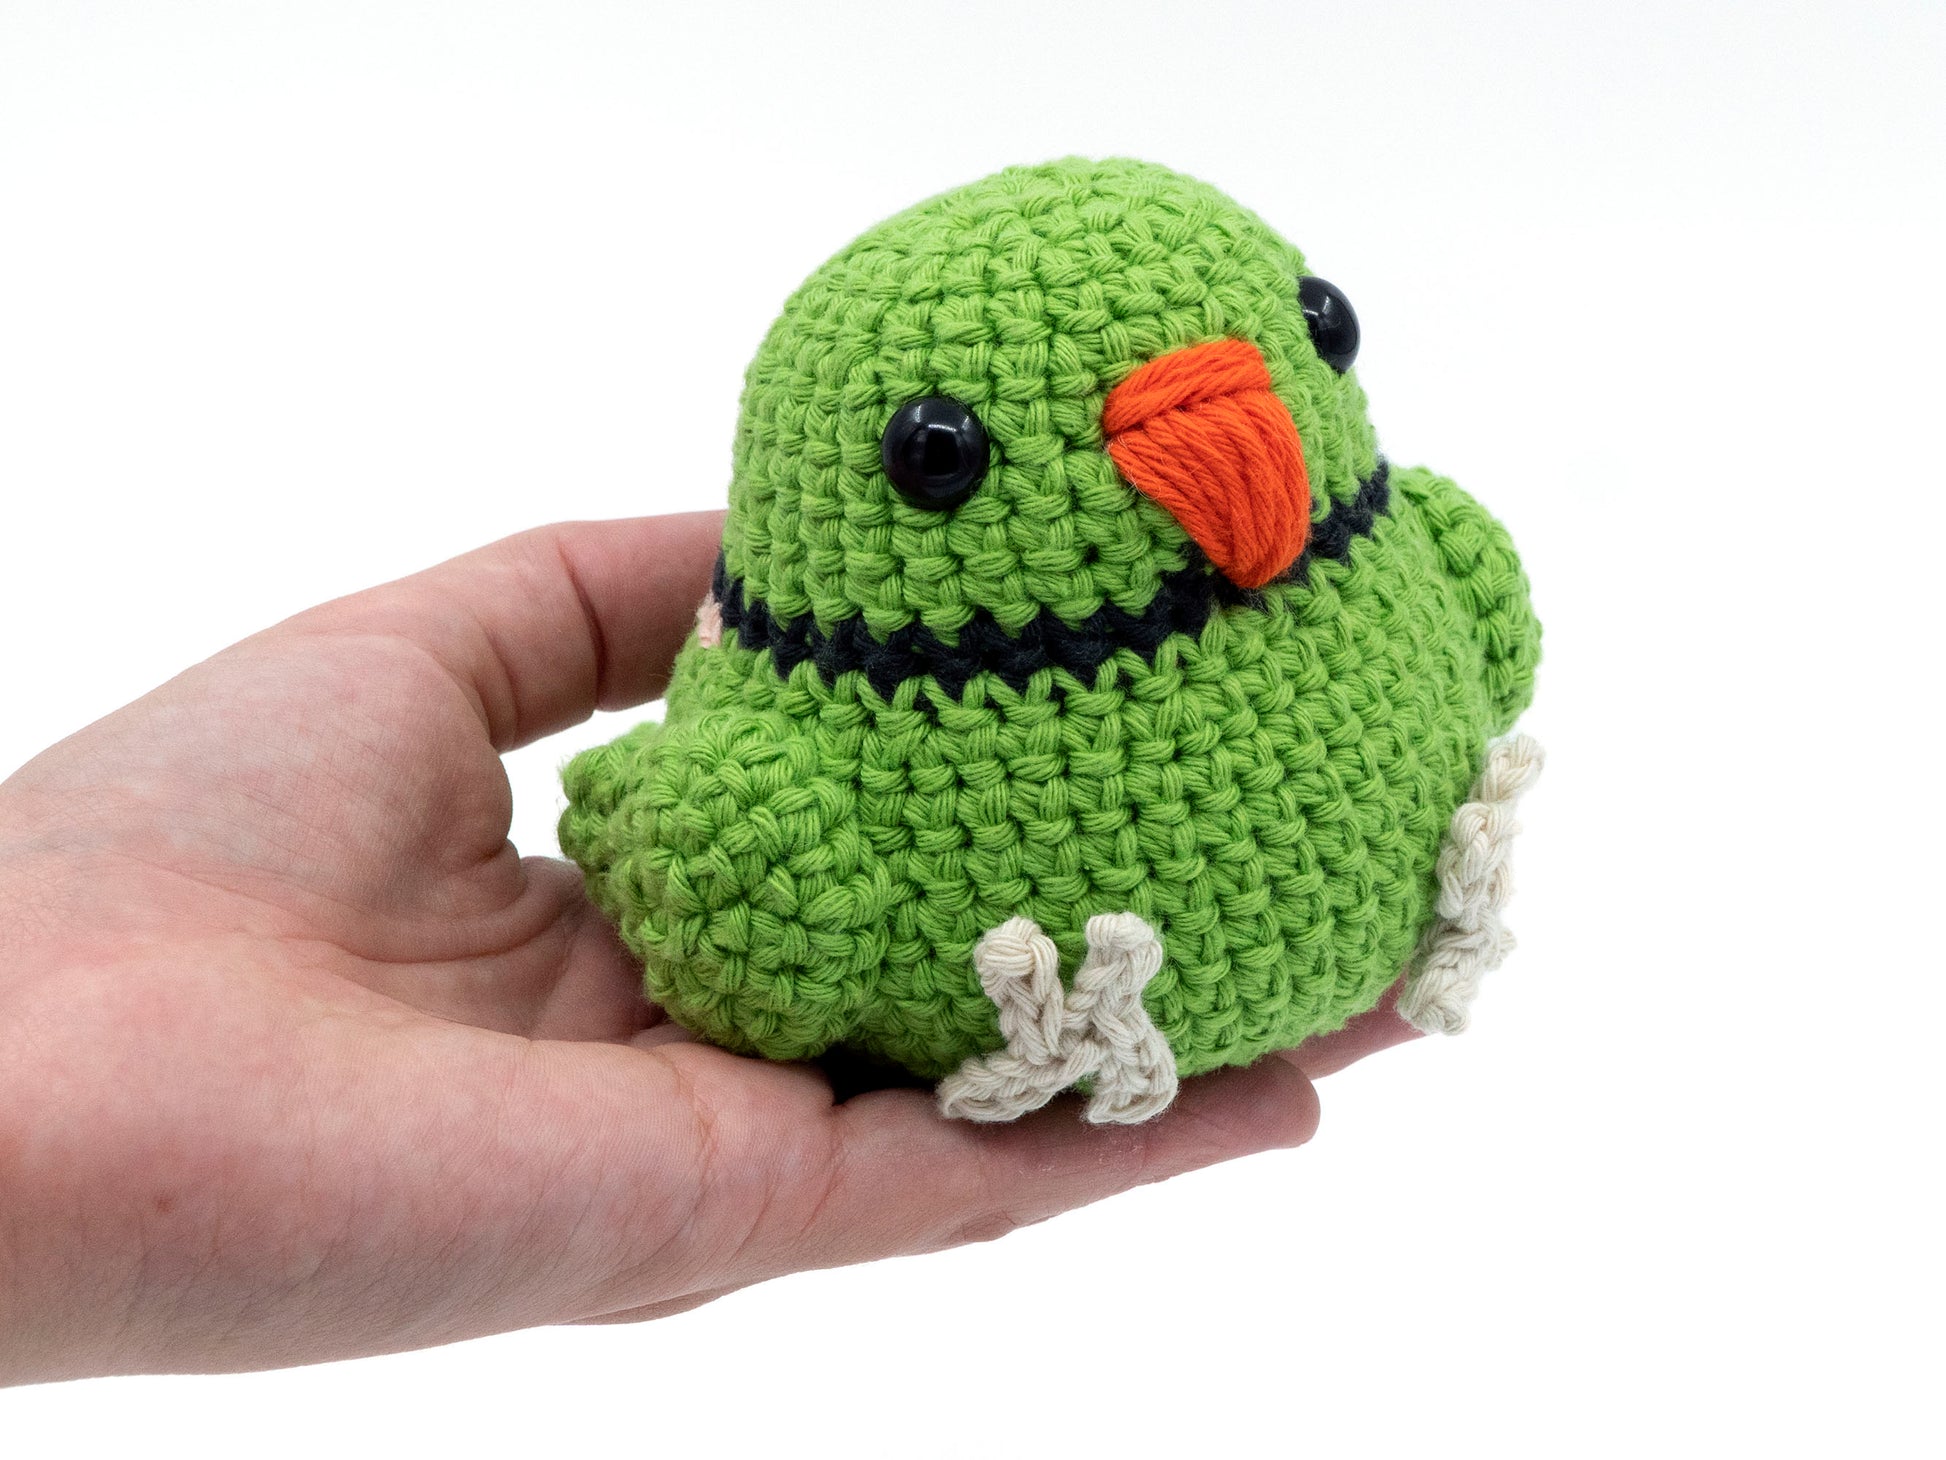 amigurumi crochet indian ringneck pattern green in hand for size comparison